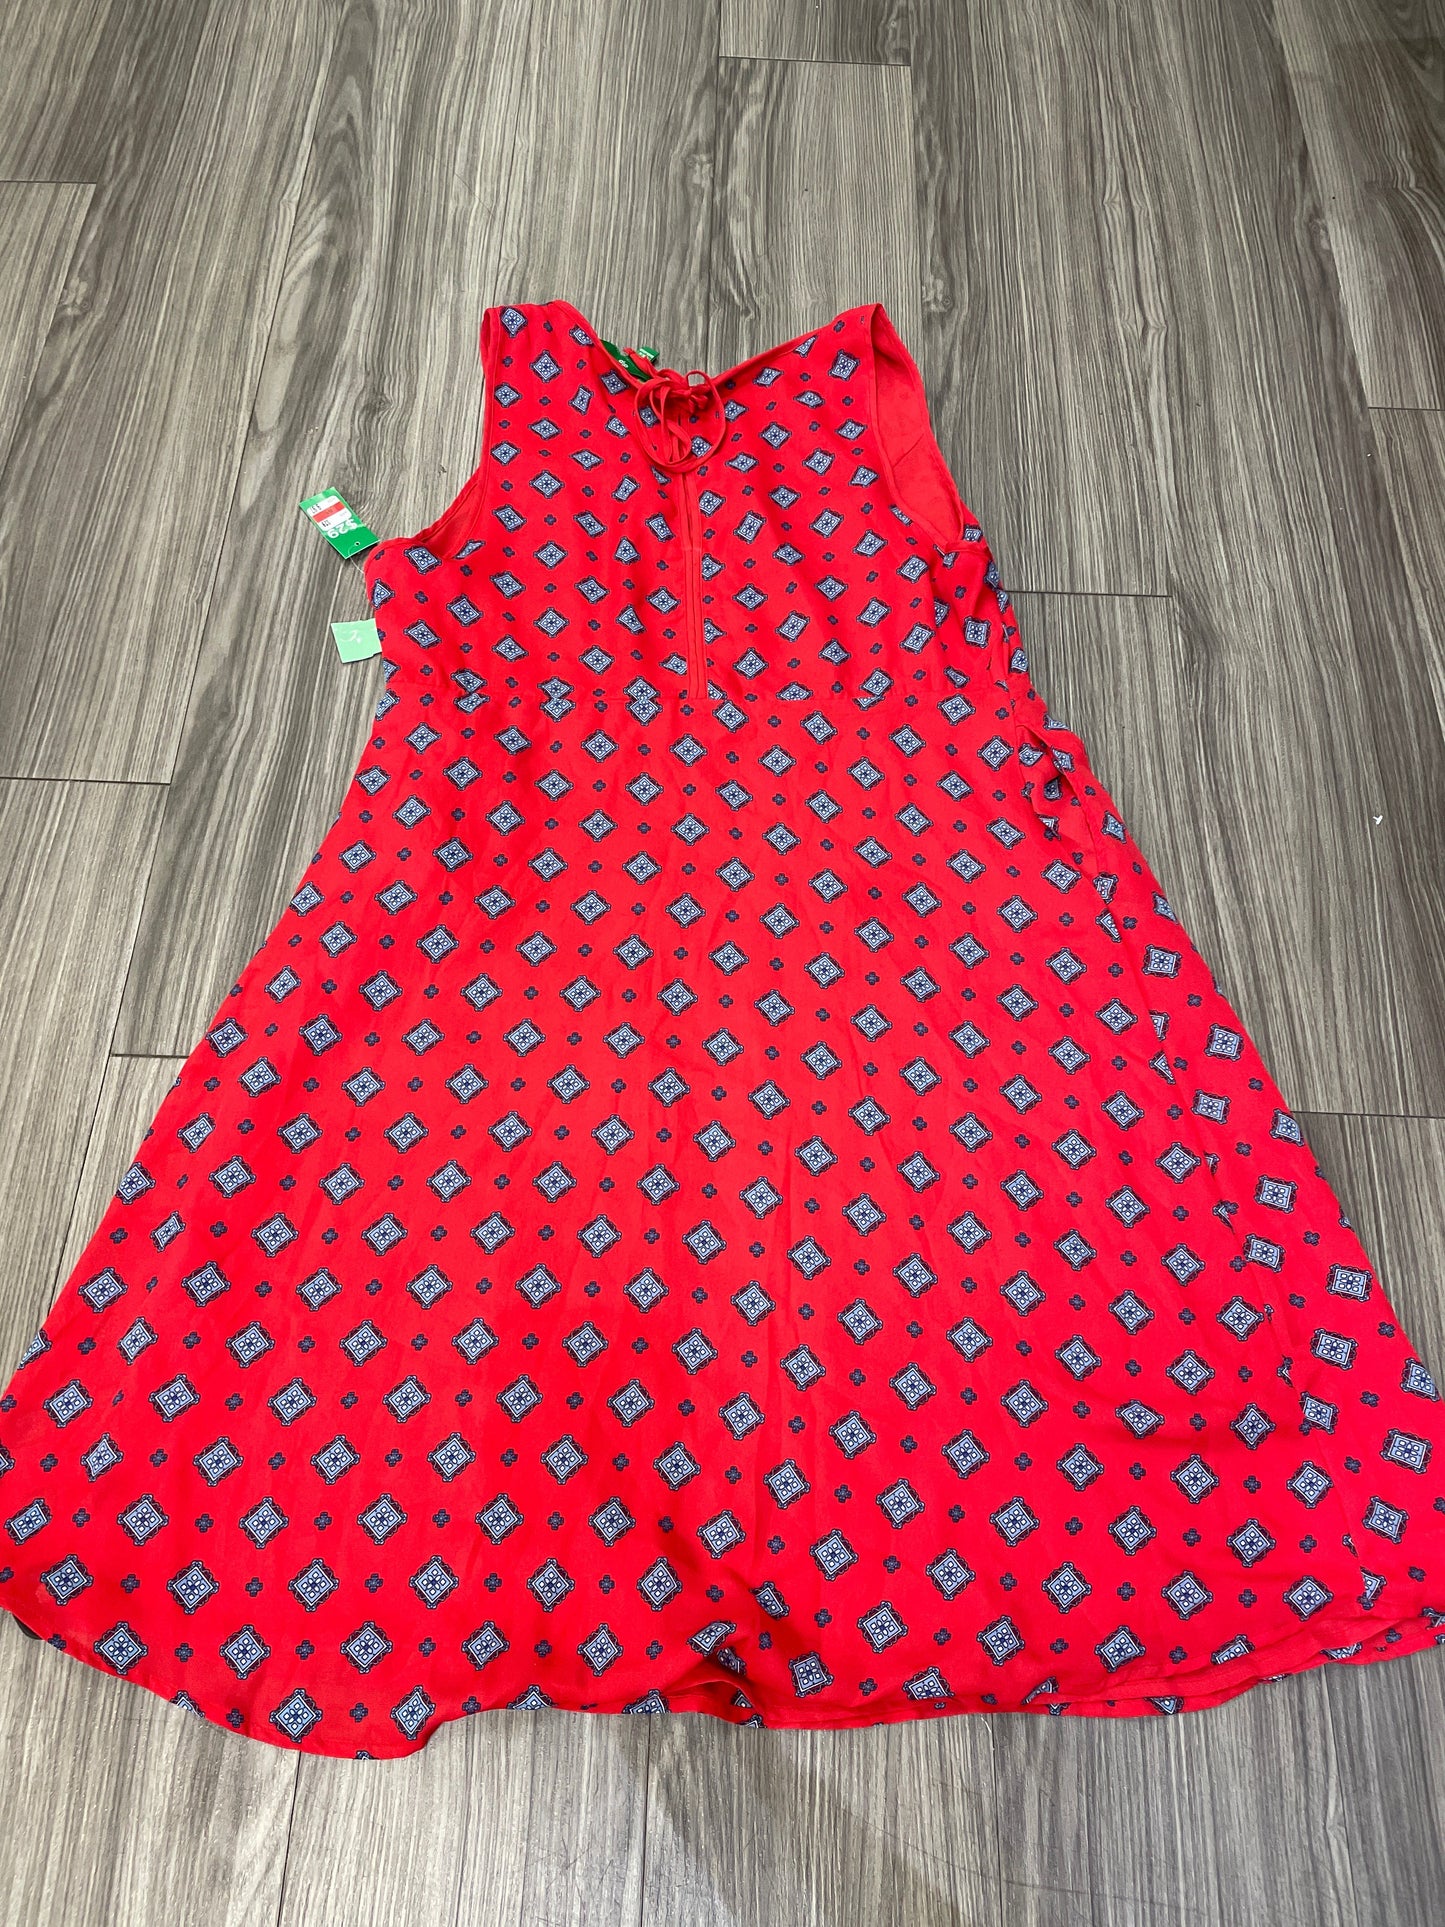 Red Dress Casual Short Dip, Size 16